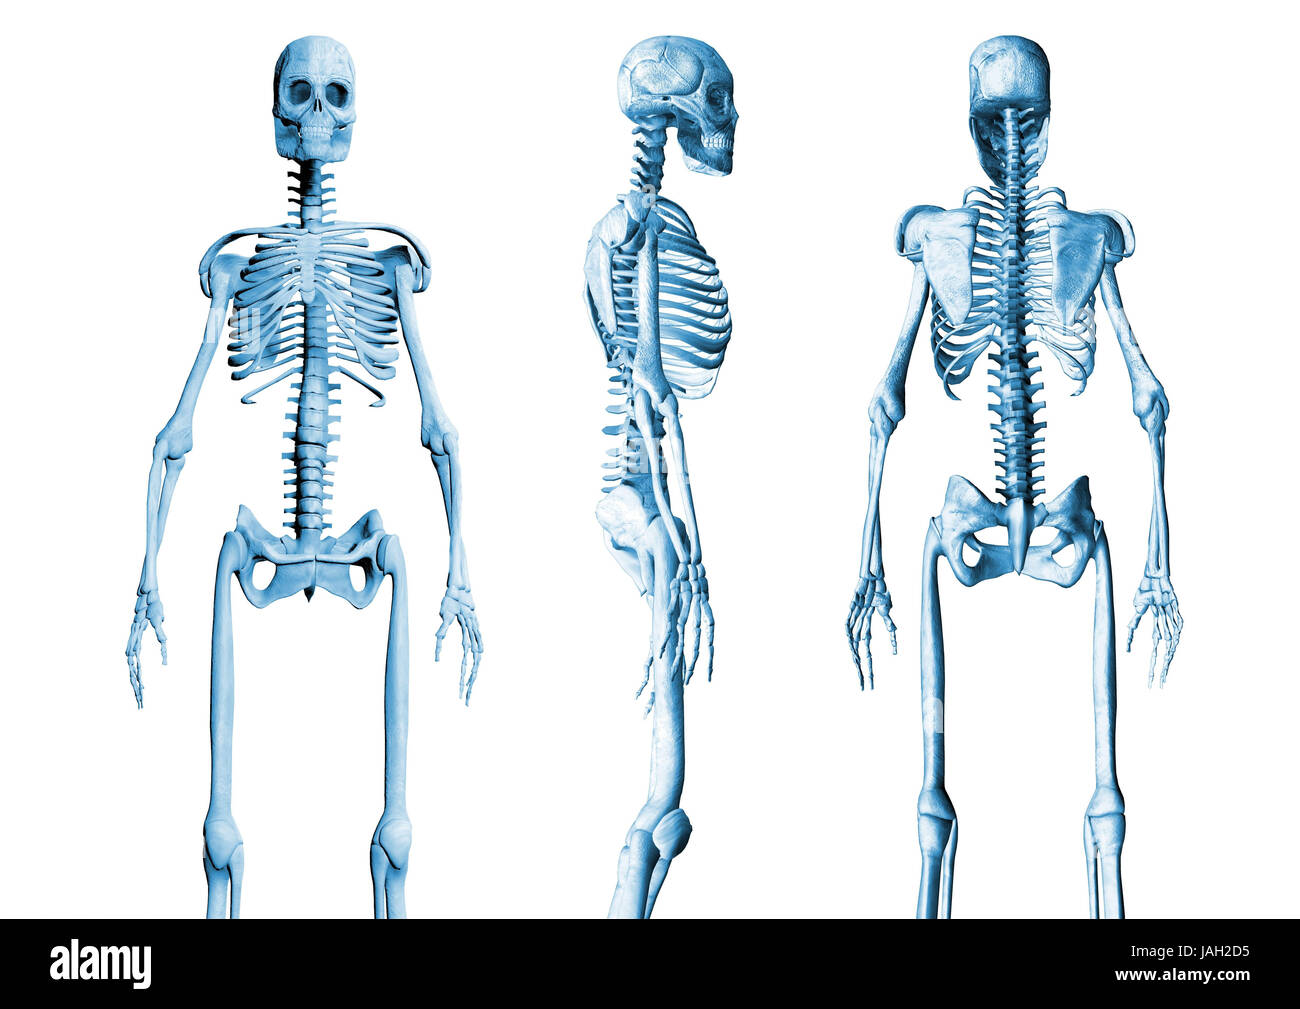 Skeletons,different views, Stock Photo